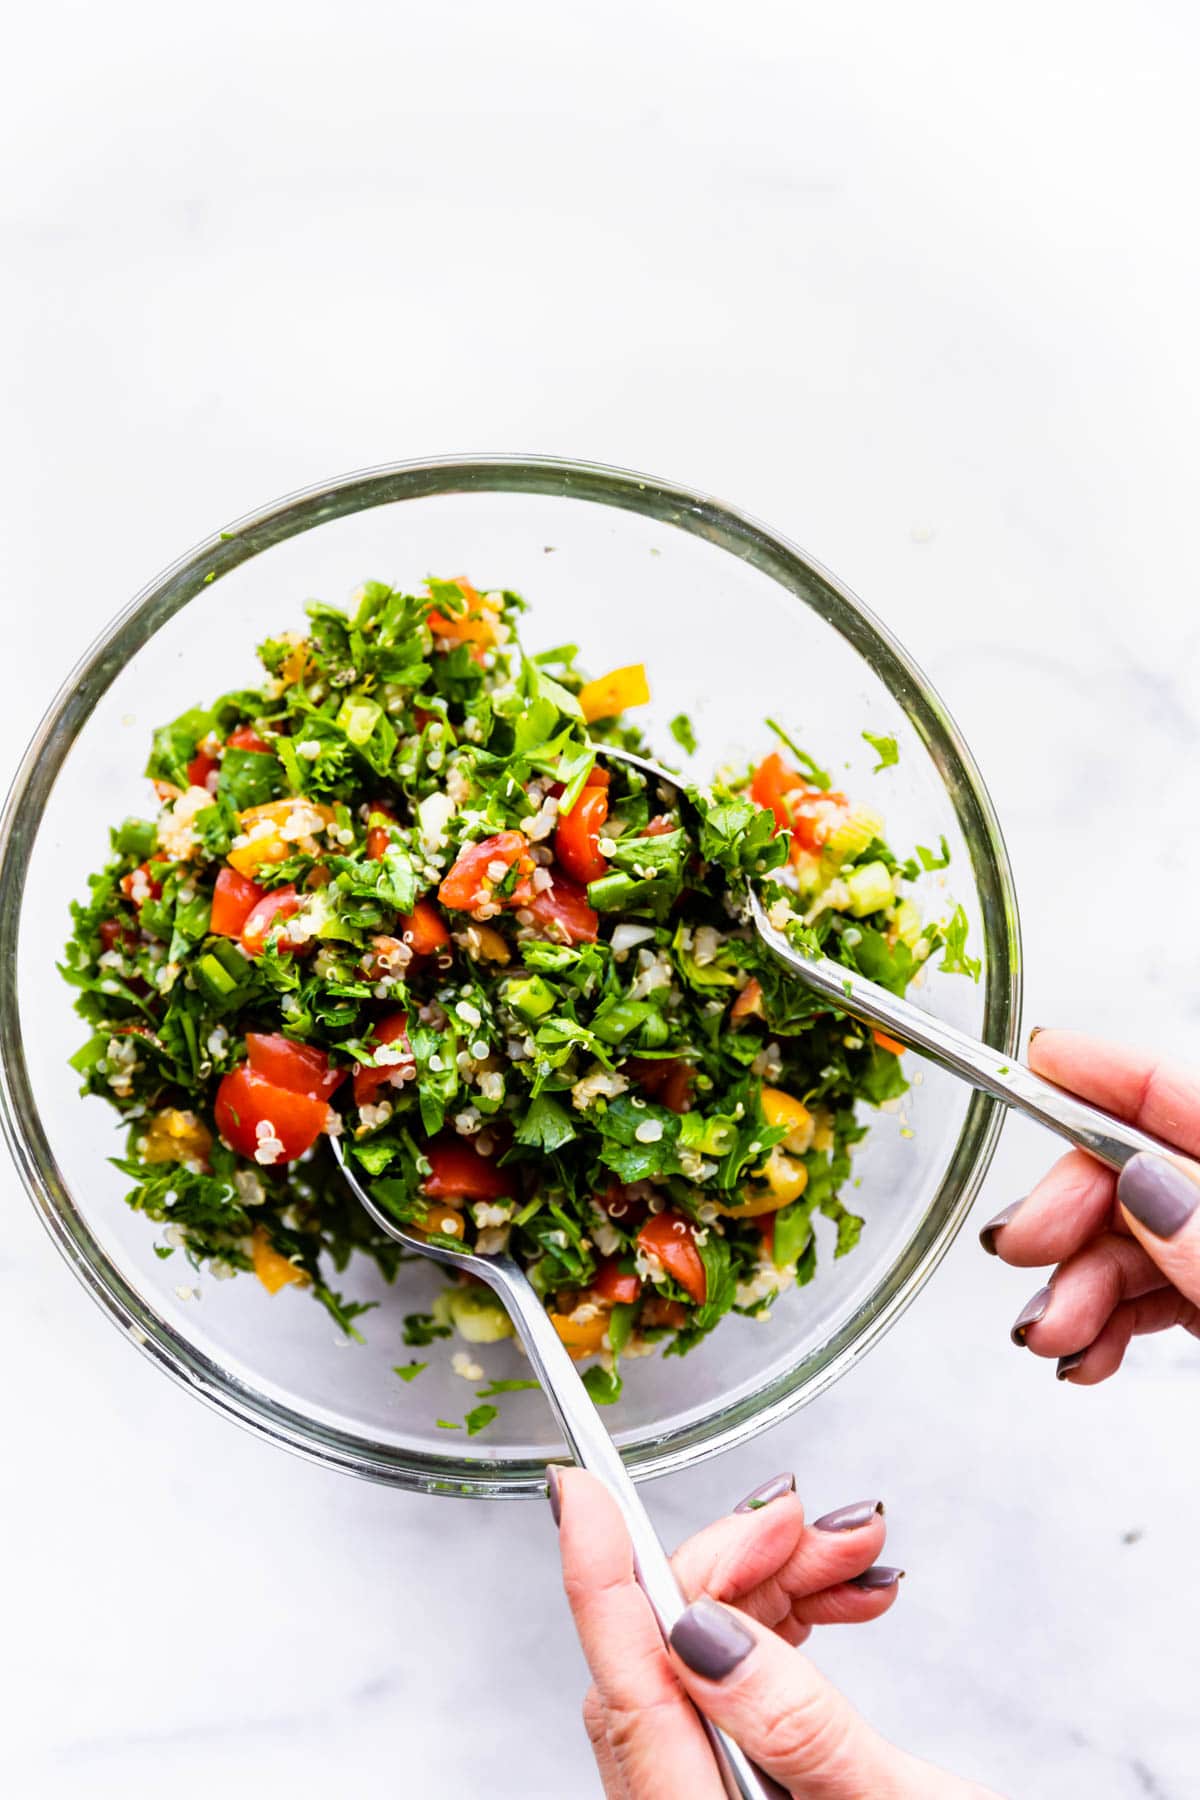 tossing gluten free tabbouleh salad ingredients in large glass bowl